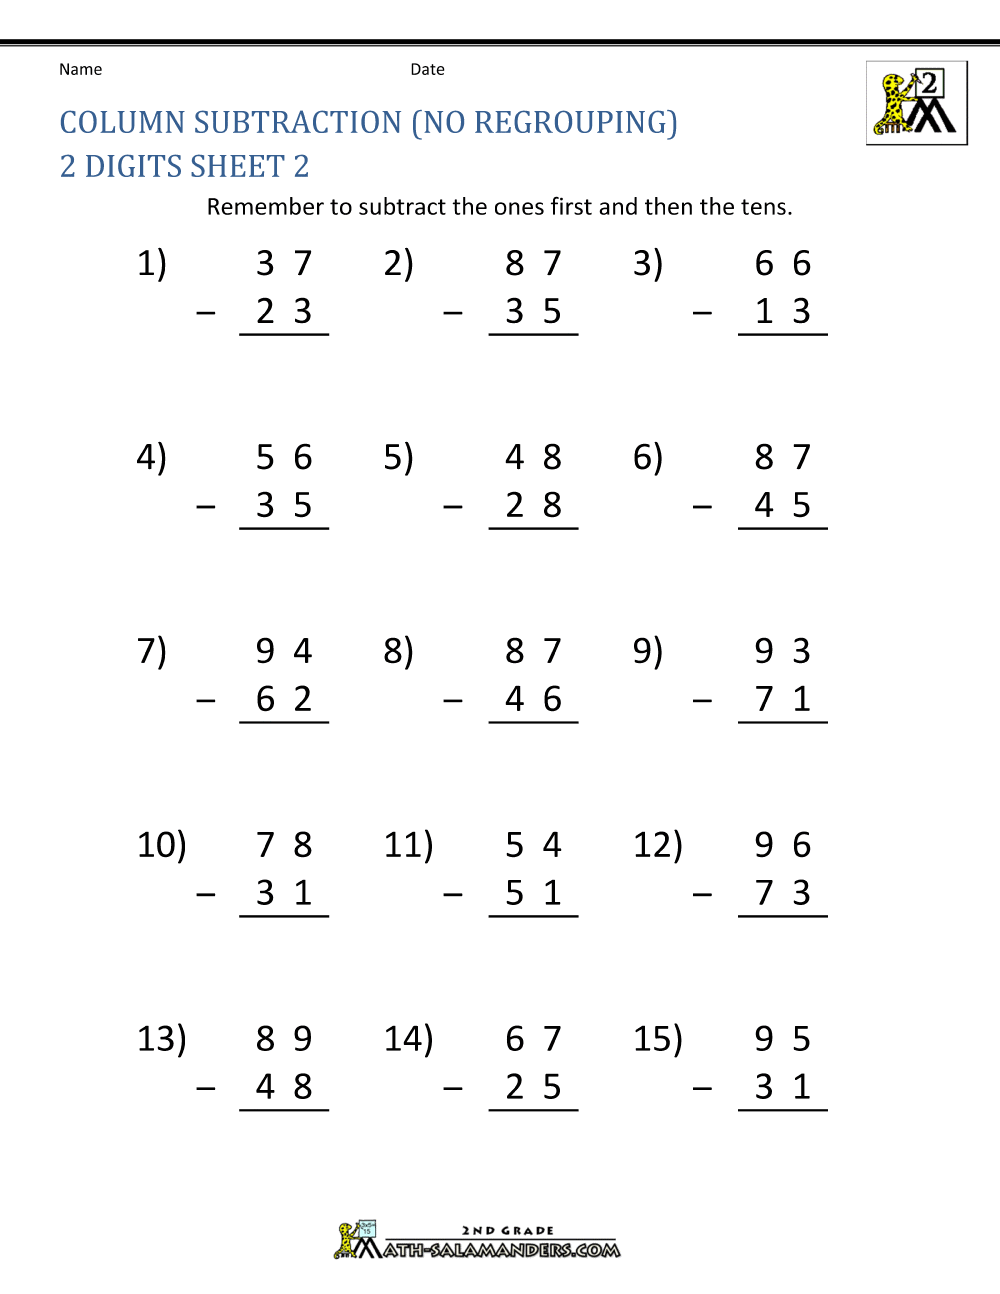 worksheet-2-digit-subtraction-with-and-without-regrouping-yaqutlab-free-worksheet